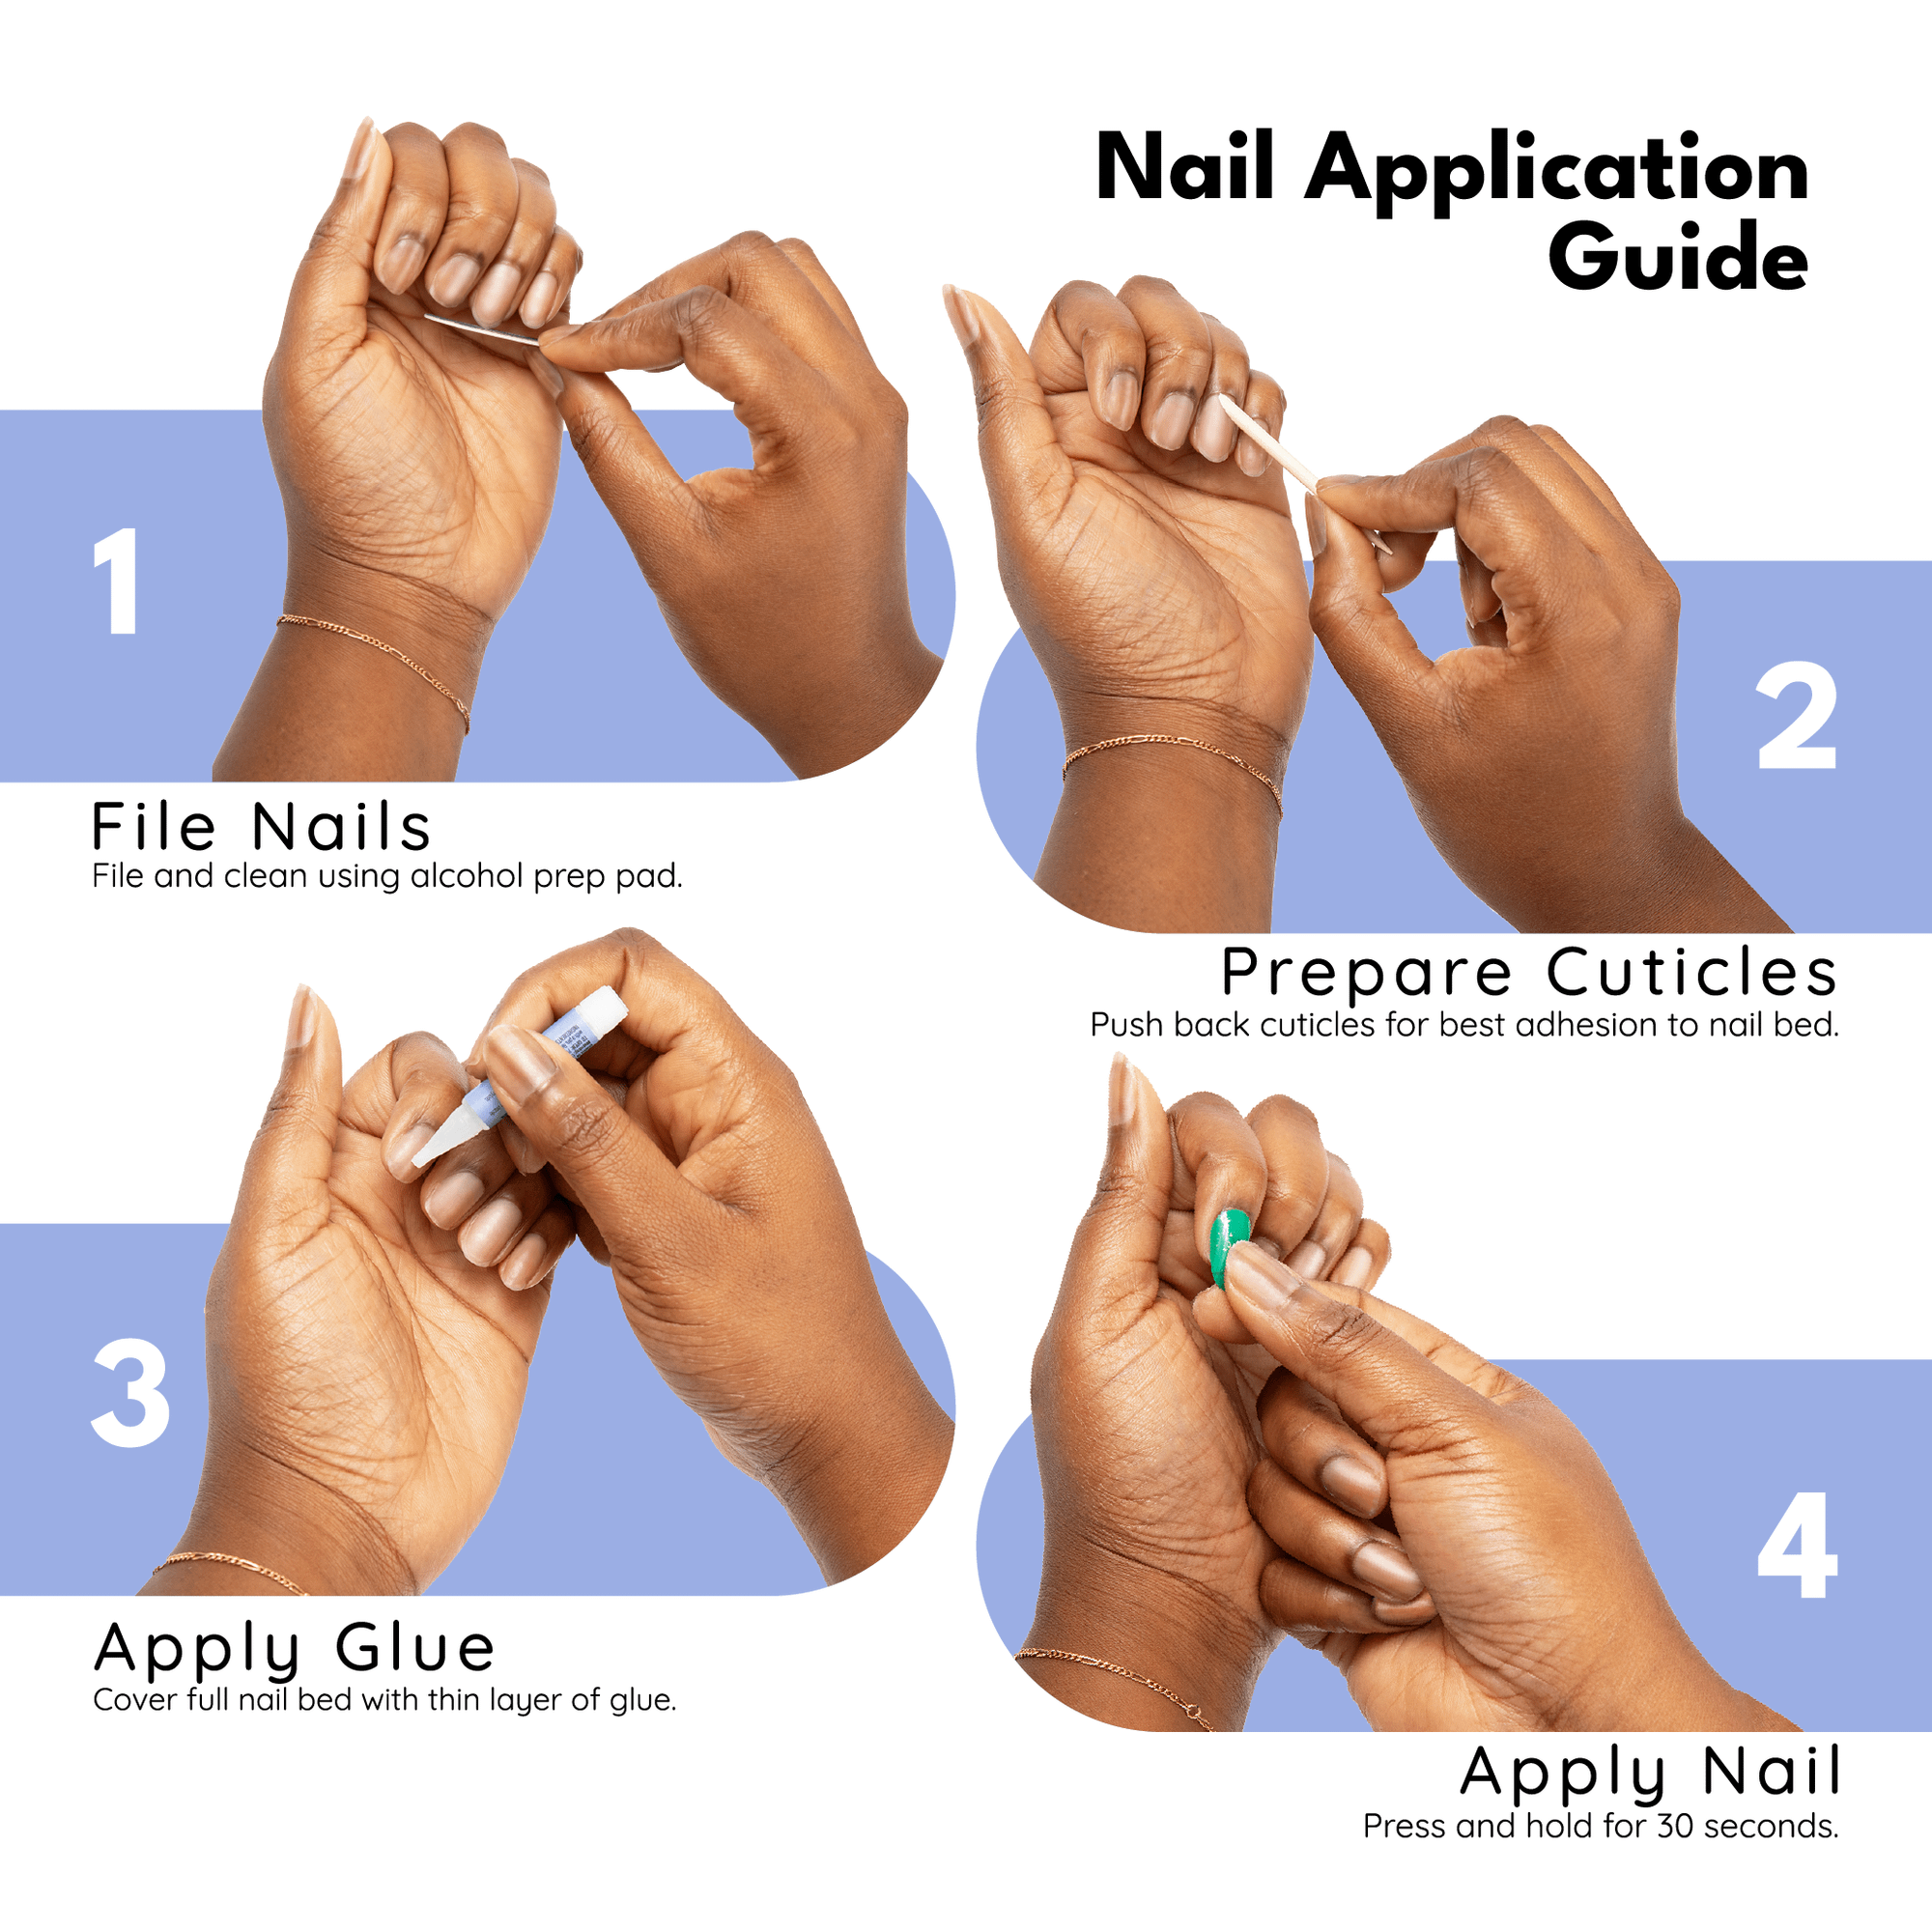 ExpressionMed Just BeCause press on fake nails application instructions. !. File nails and clean using alcohol prep pad. 2. Prepare cuticles, push back cuticles for best adhesion to nail bed. 3. Apply Glue, cover ful nail bed with thin layer of glue. 4. Apply nail, press and hold for 30 seconds		